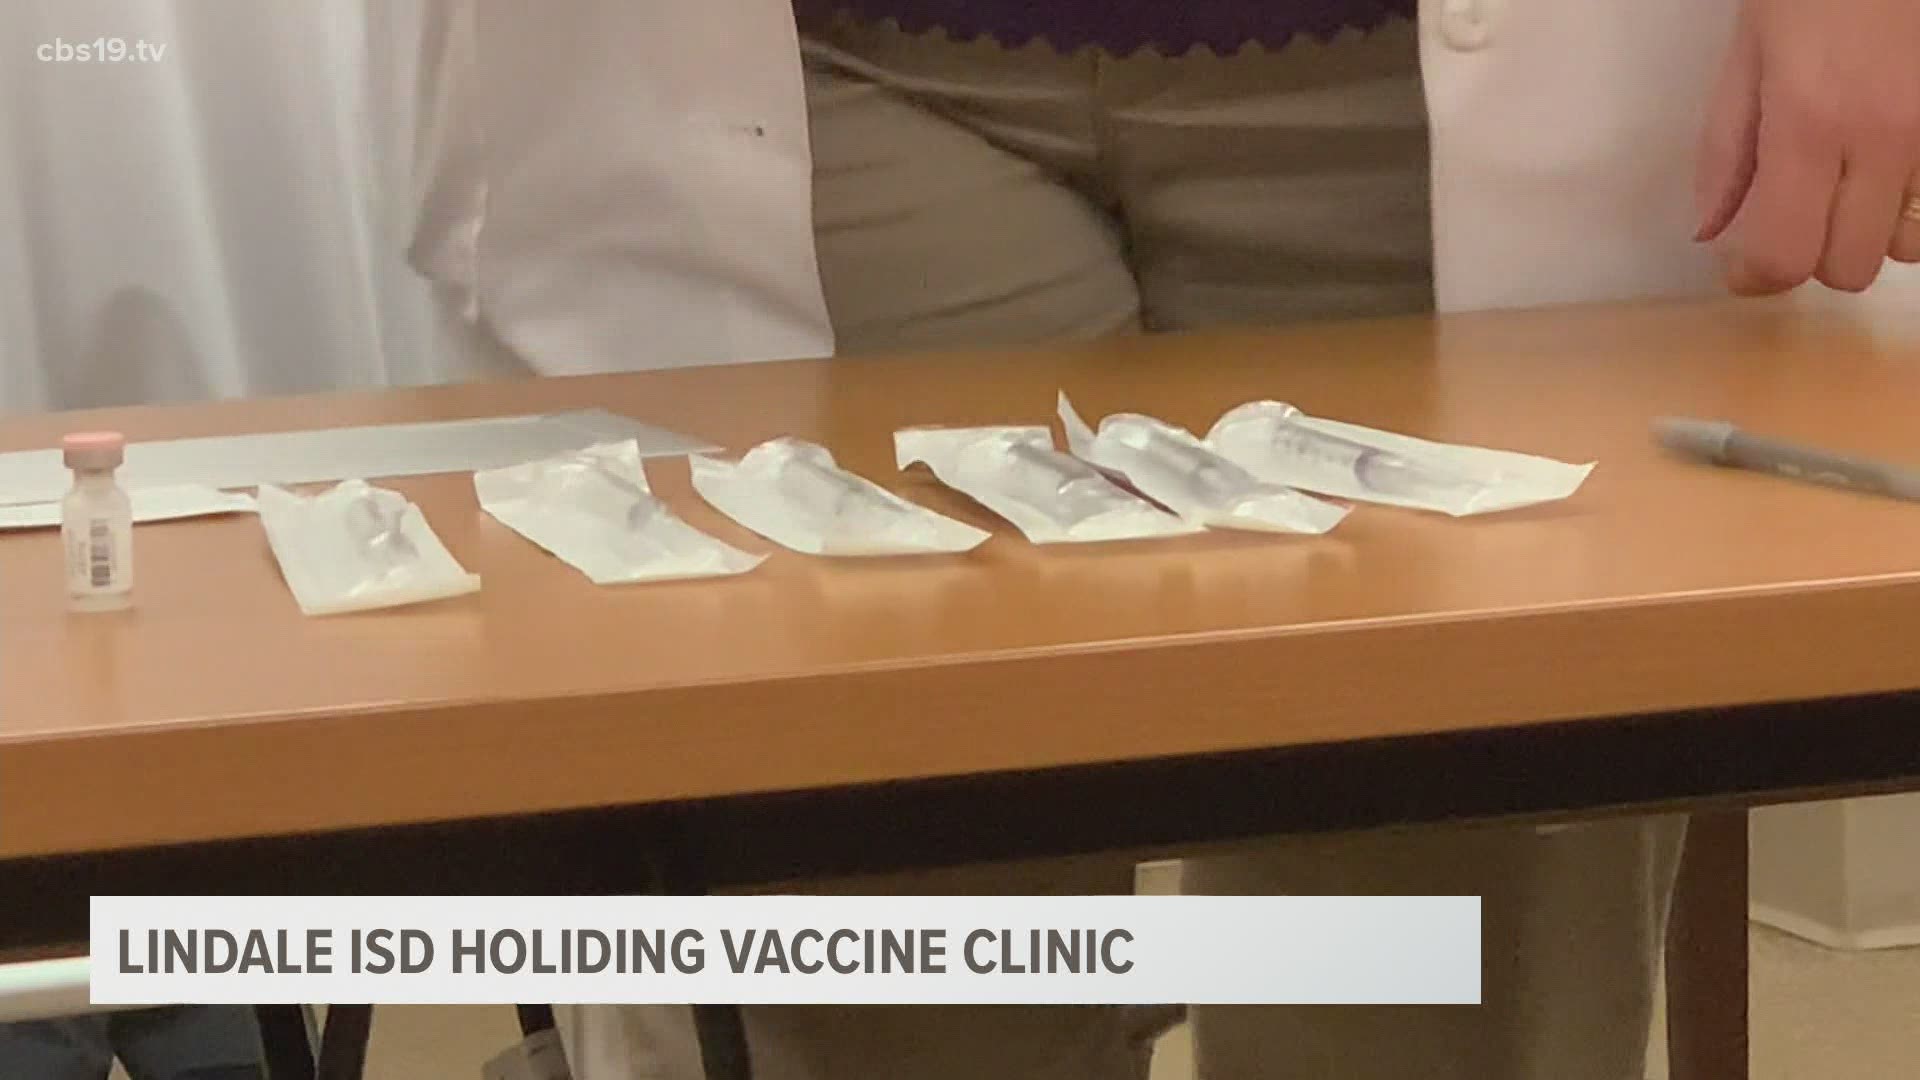 According to Lindale ISD, more than 200 employees have received both doses of the Moderna COVID-19 vaccine.